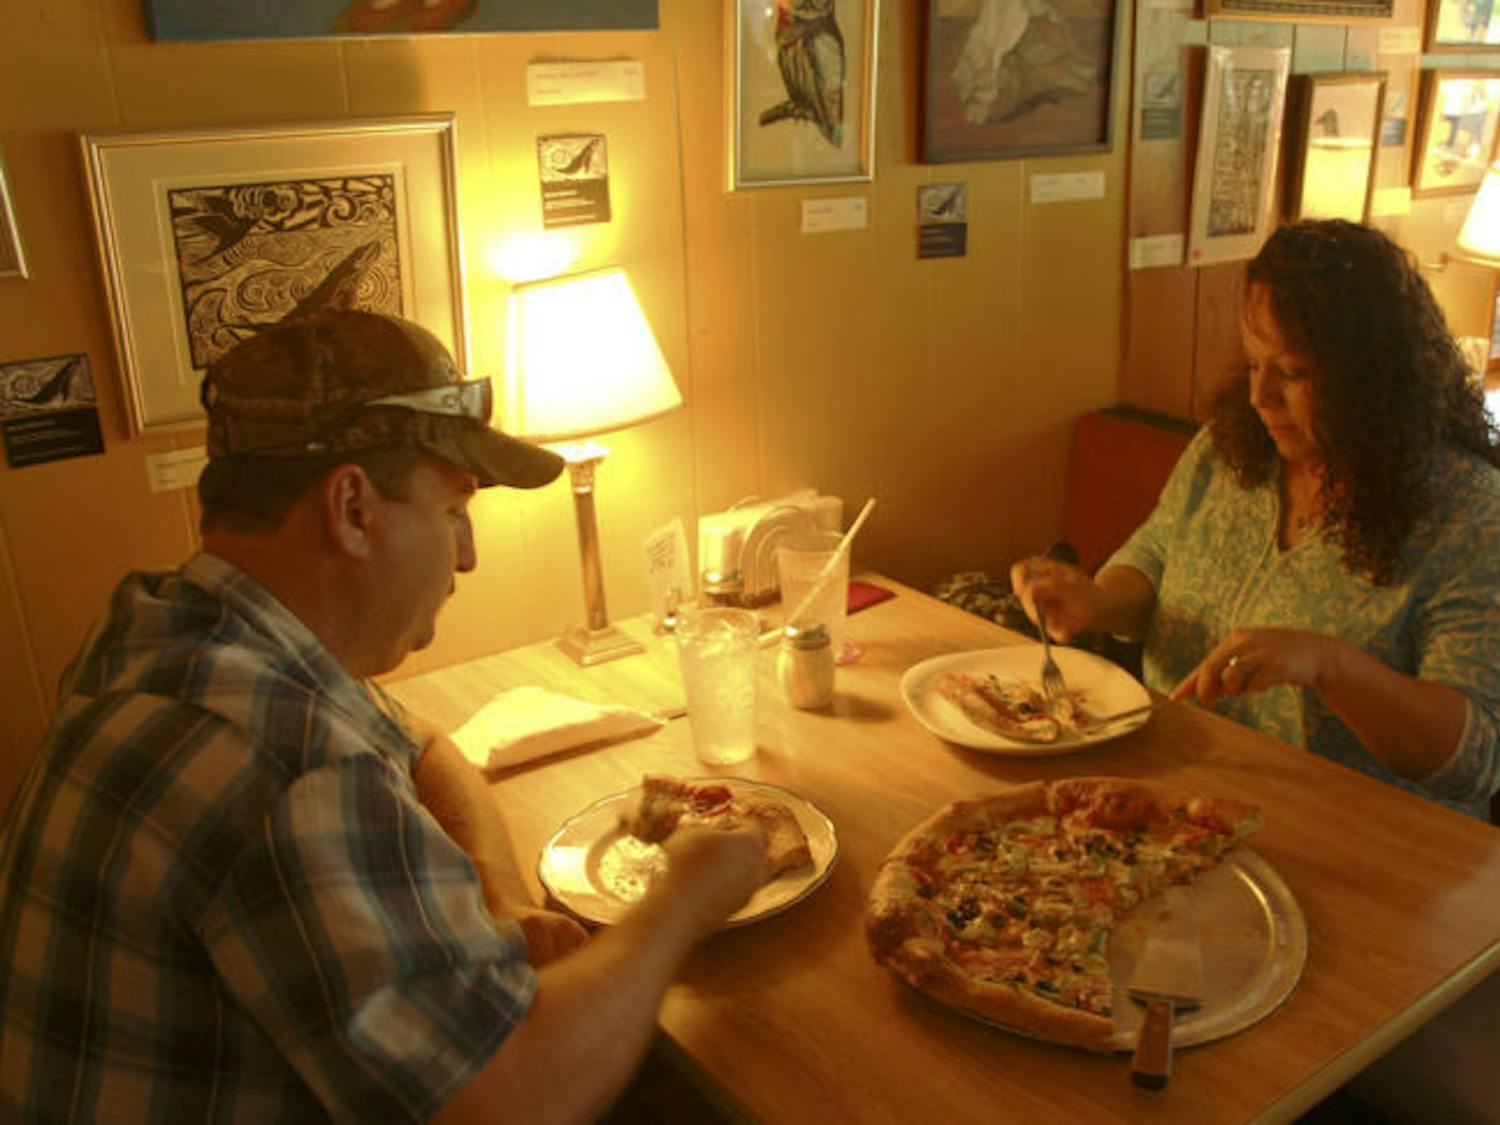 Henry and Kim Hines went to Satchel’s Pizza for their first time Wednesday afternoon. The couple said they weren’t surprised at the restaurant’s high ranking on the list.